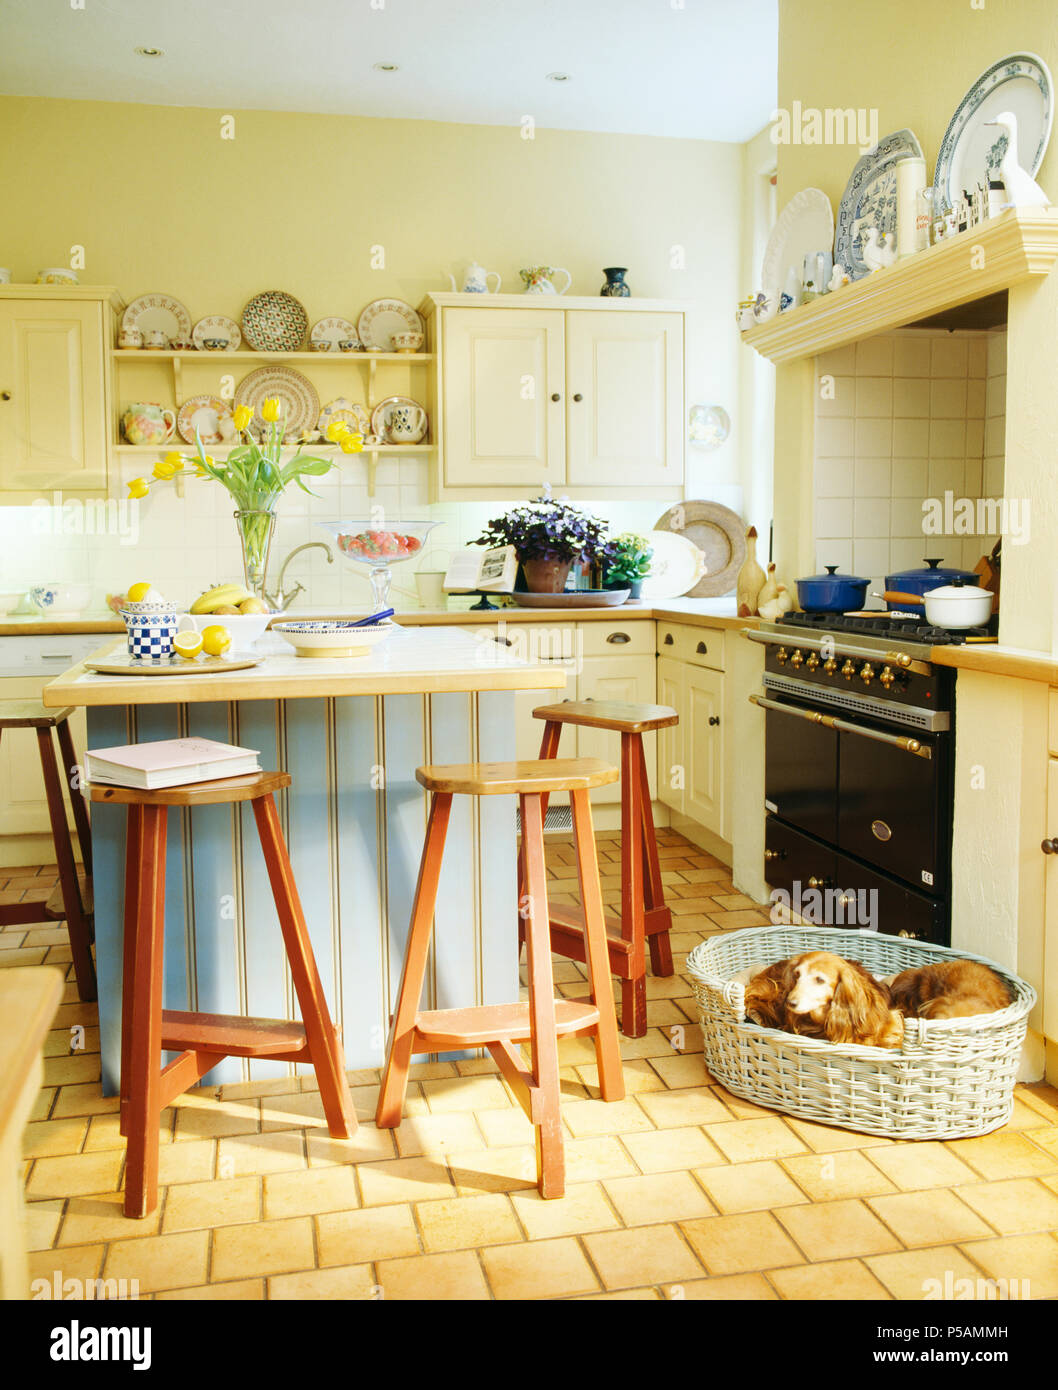 Simple wooden stools at pale blue island unit in cream cottage kitchen with dogs lying in basket beside range oven Stock Photo